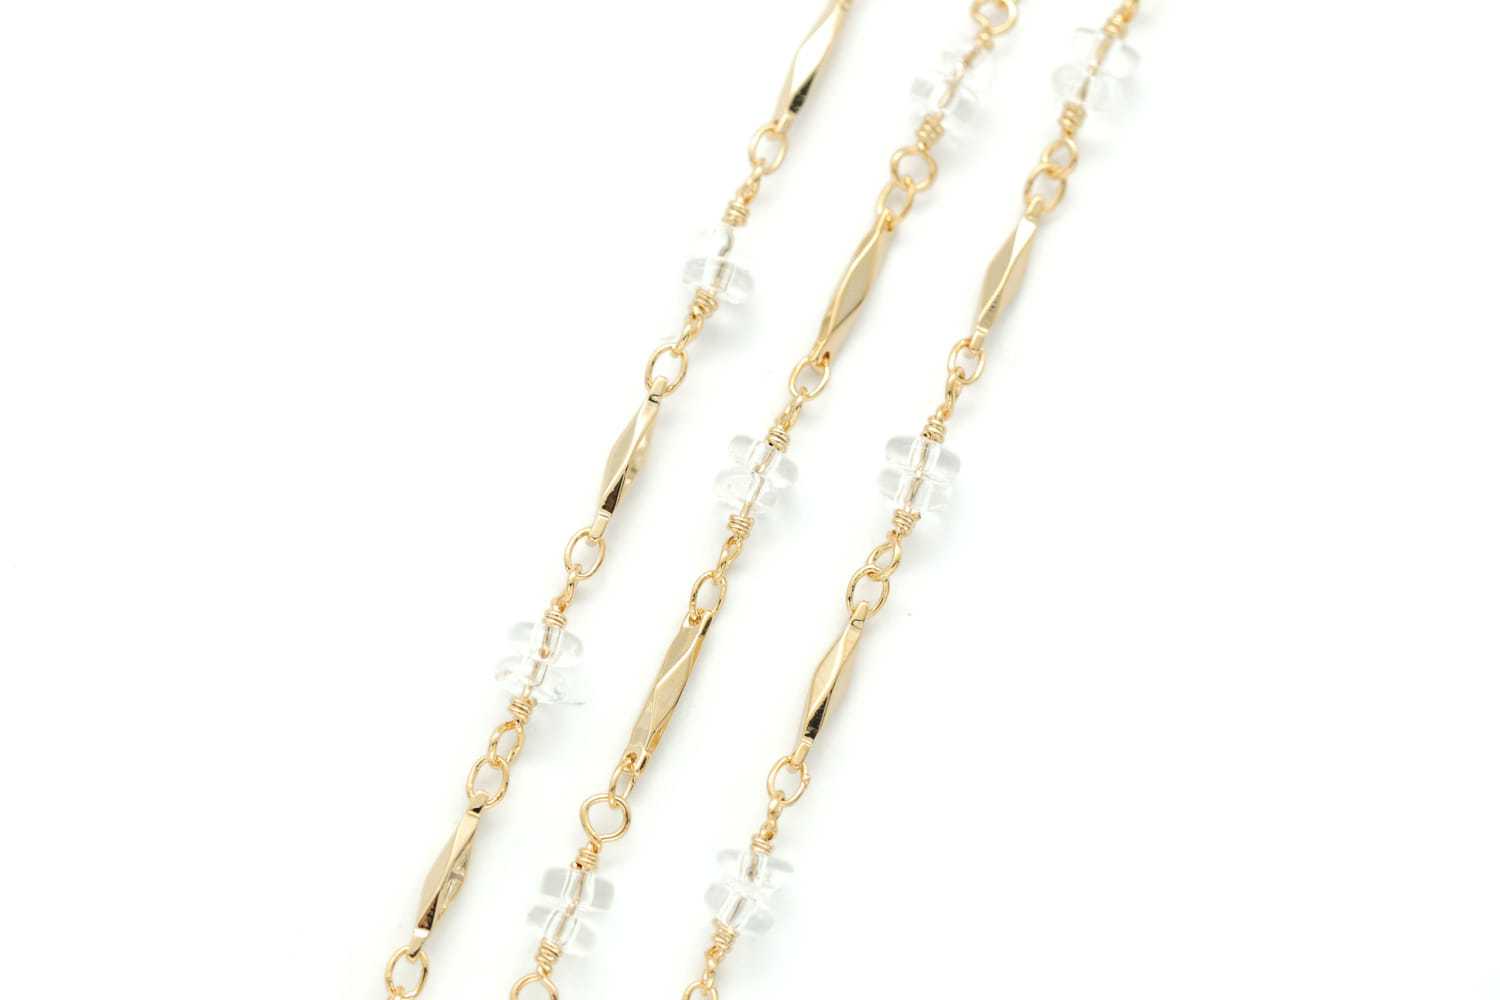 [CJ46-07]Acrylic beads chain, 1m, 16K gold plated copper brass, Acrylic beads, Nickel free, Dainty chain, Pearl chain, BS-85